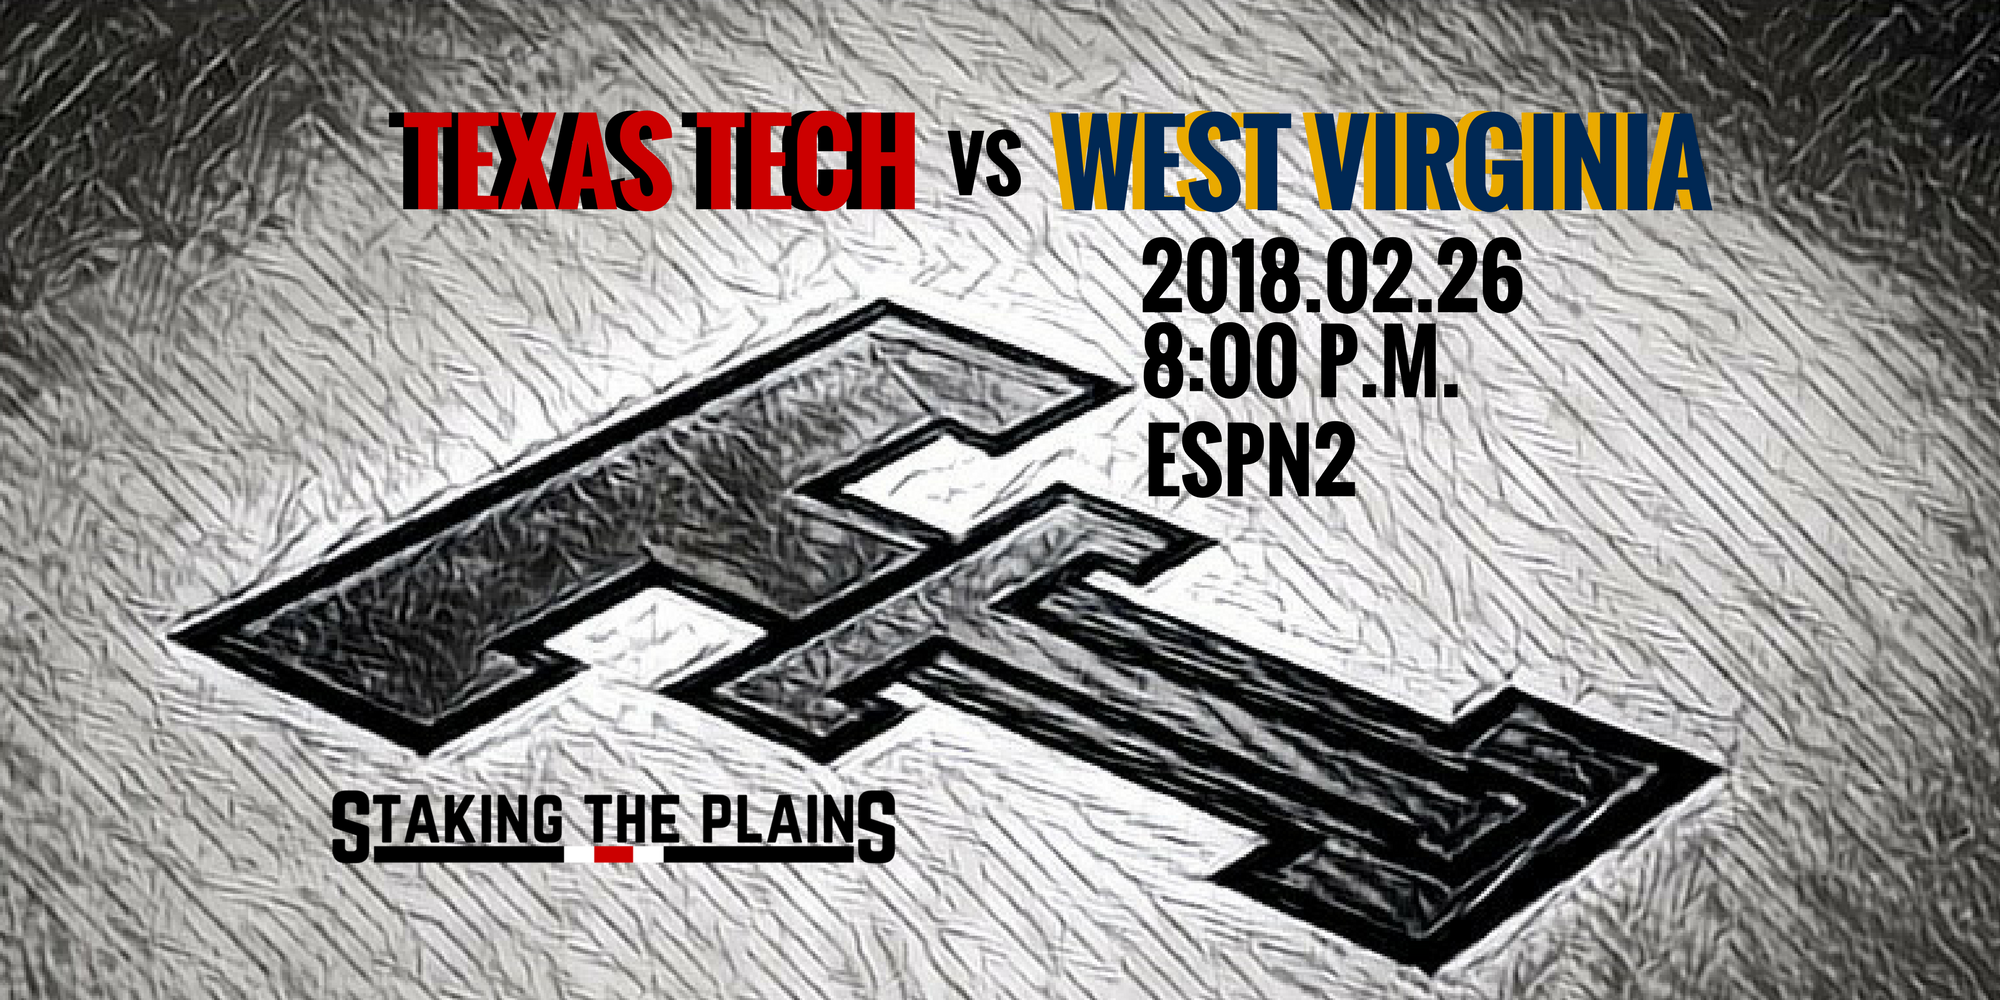 Preview and Game Thread: Texas Tech vs. West Virginia